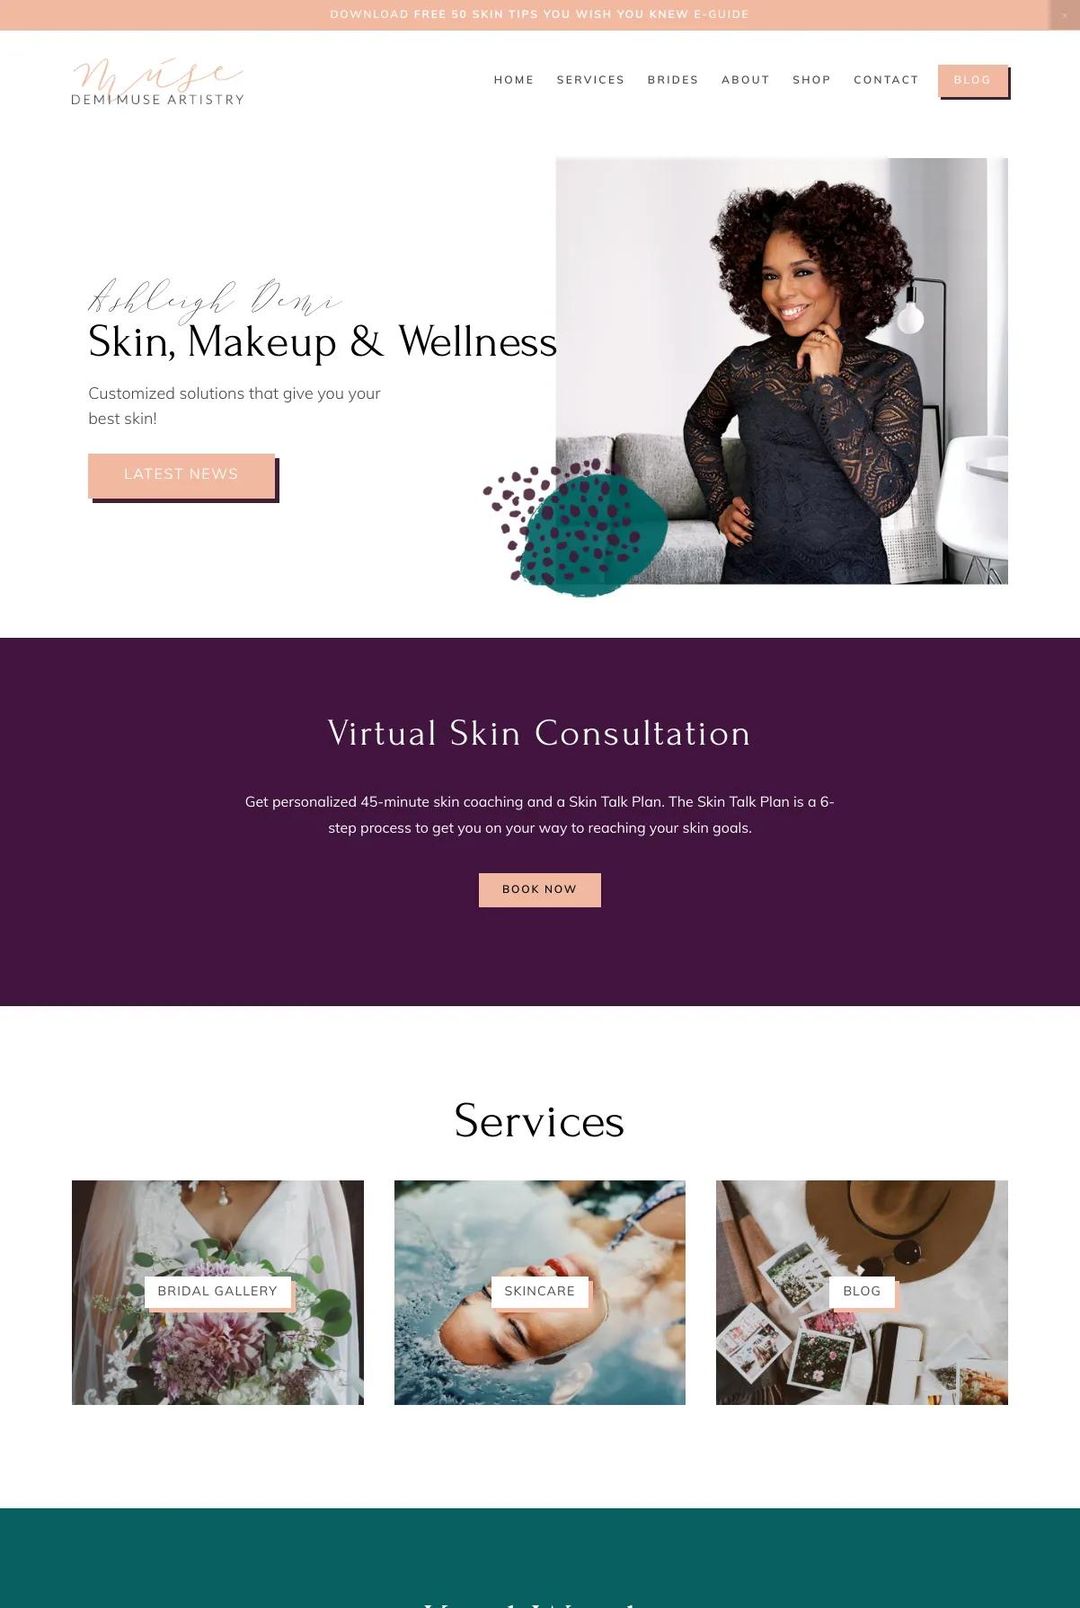 Screenshot 1 of Demi Muse Artistry (Example Squarespace Esthetician Website)